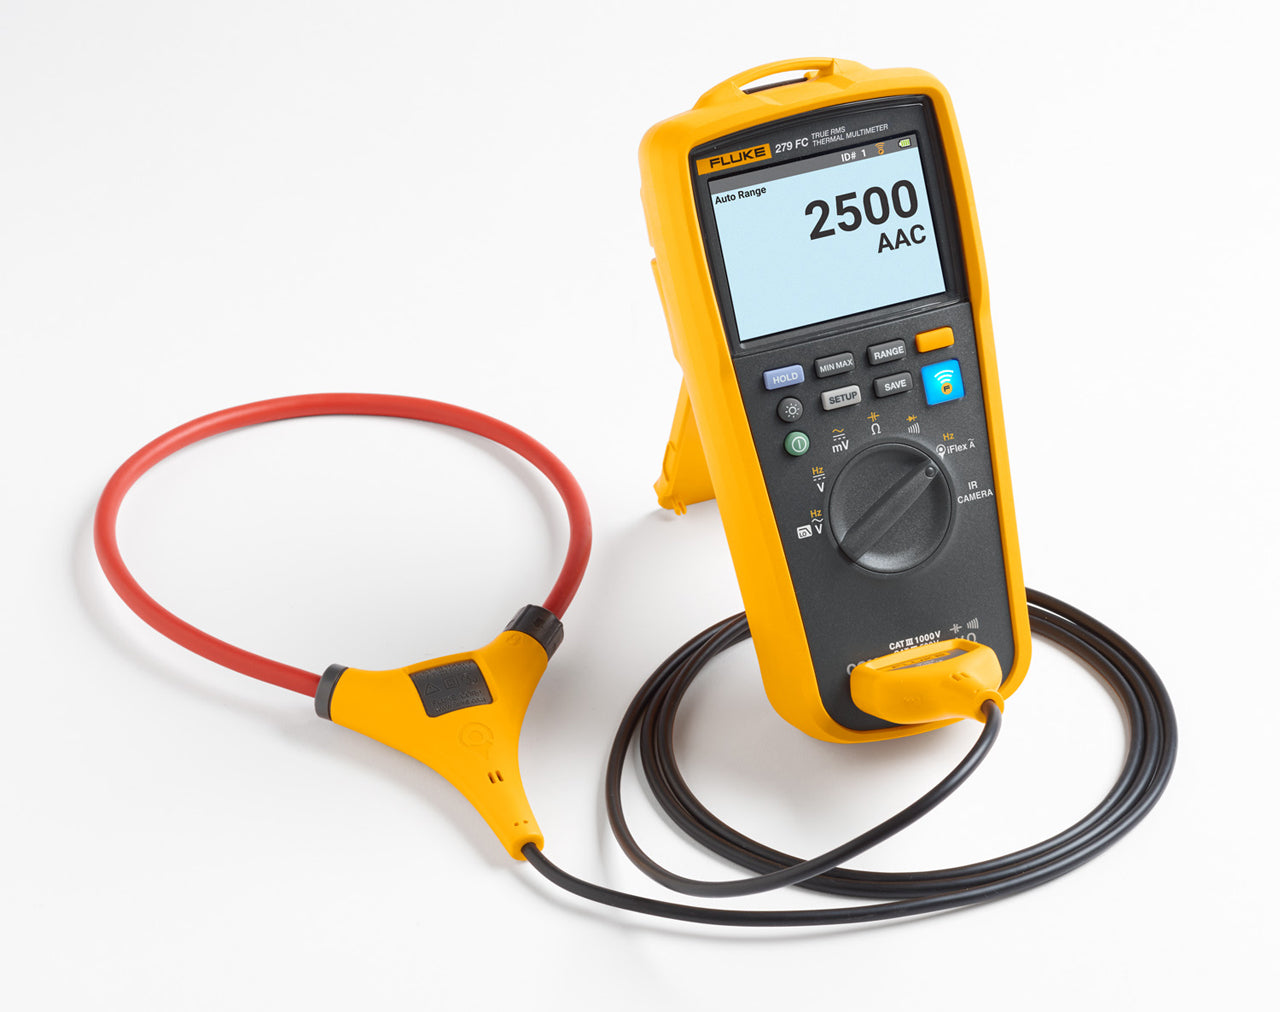 FLUKE 279FC FULL-FEATURED DIGITAL MULTIMETER WITH INTEGRATED THERMAL IMAGING